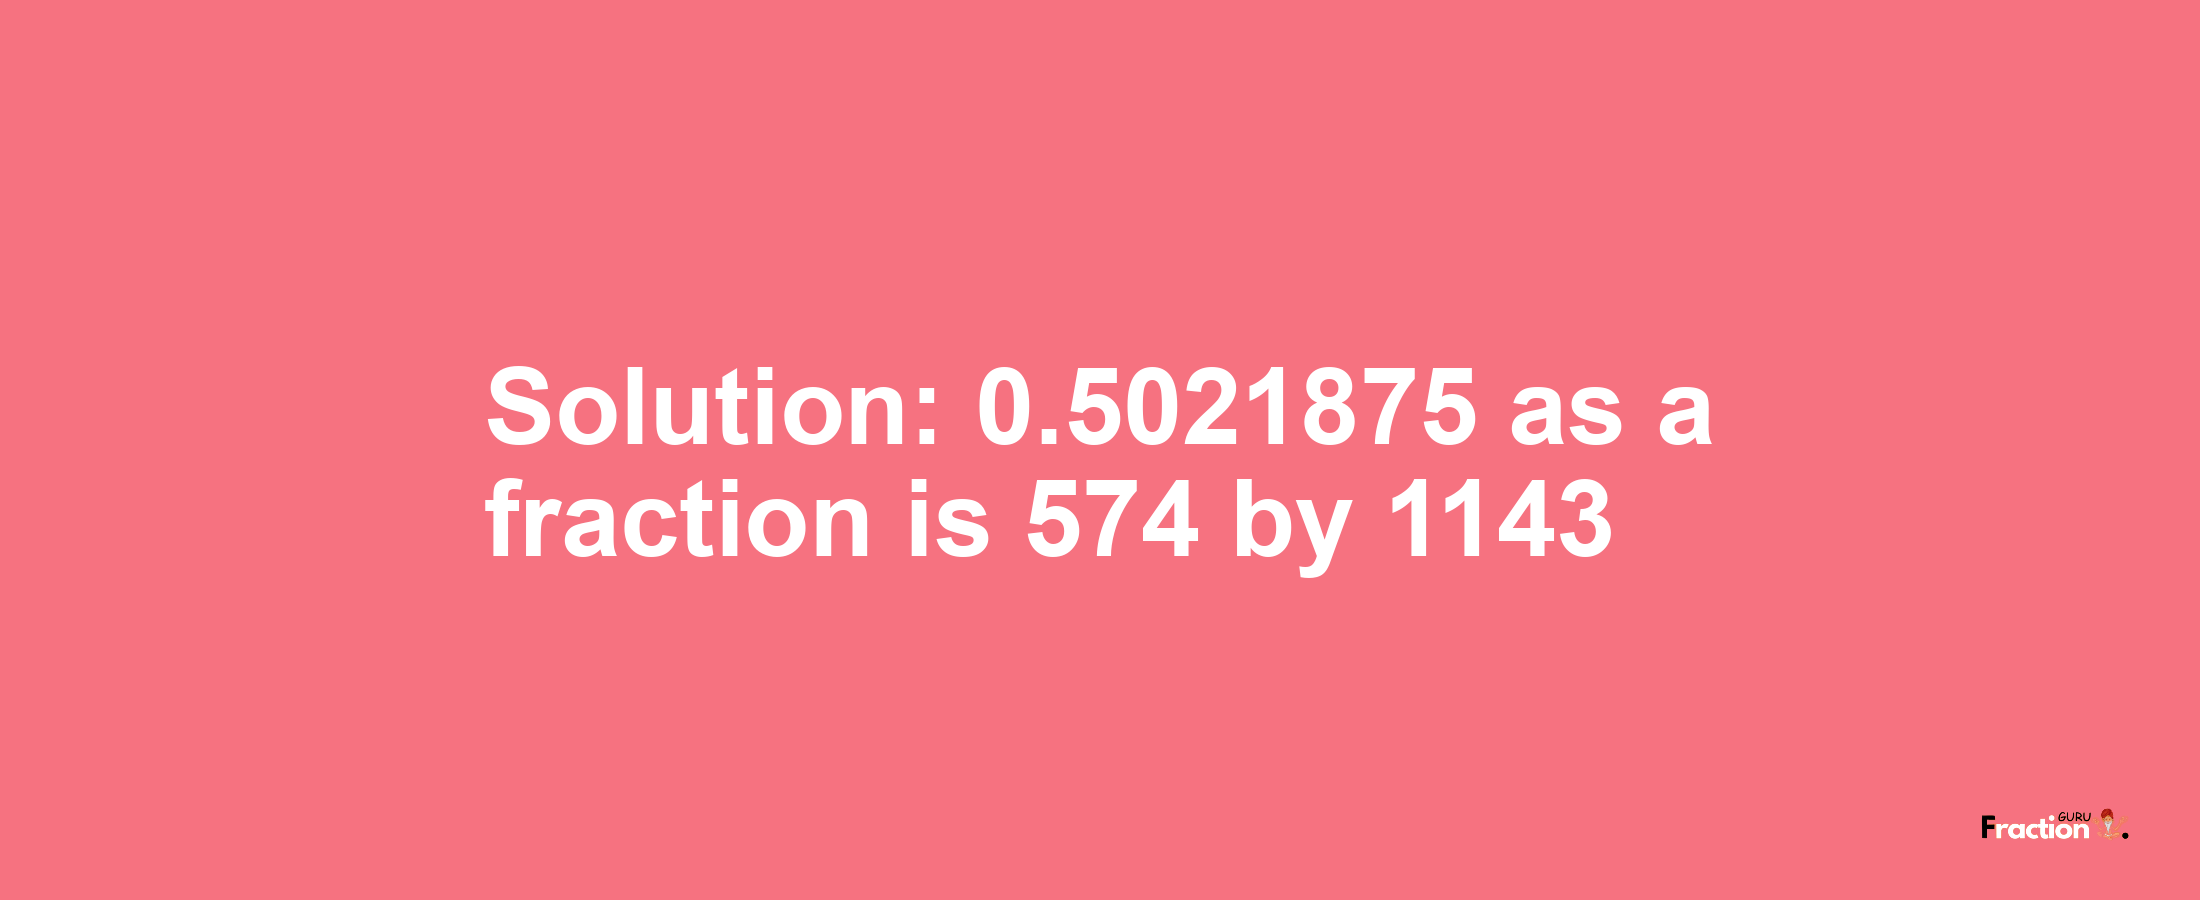 Solution:0.5021875 as a fraction is 574/1143